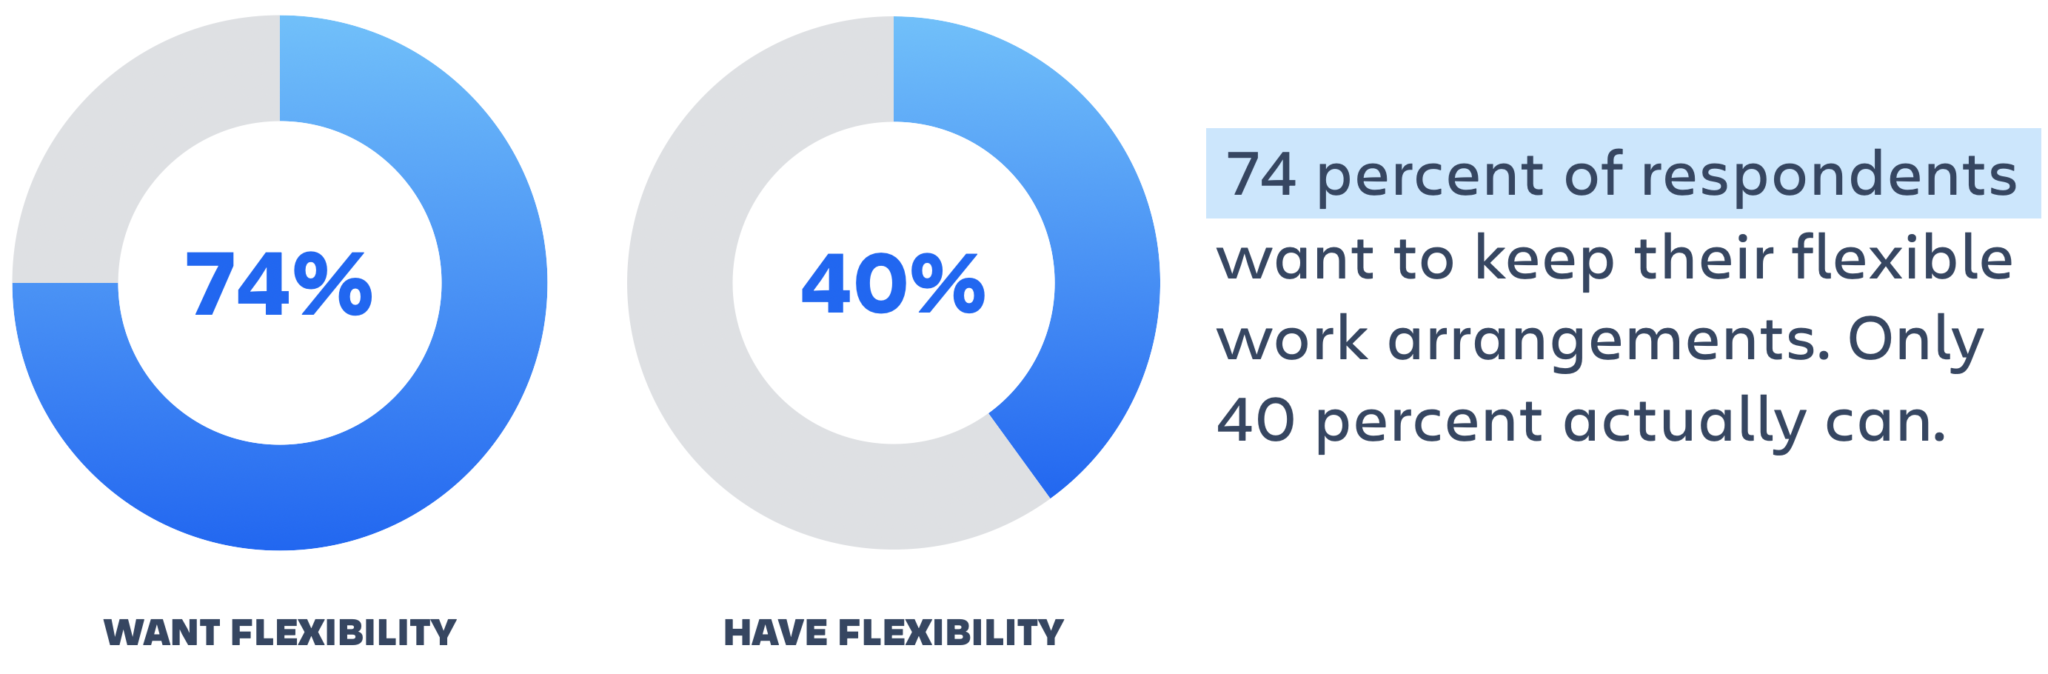 Charts showing that 74% of people want flexible work arrangements, while only 40% actually have that.